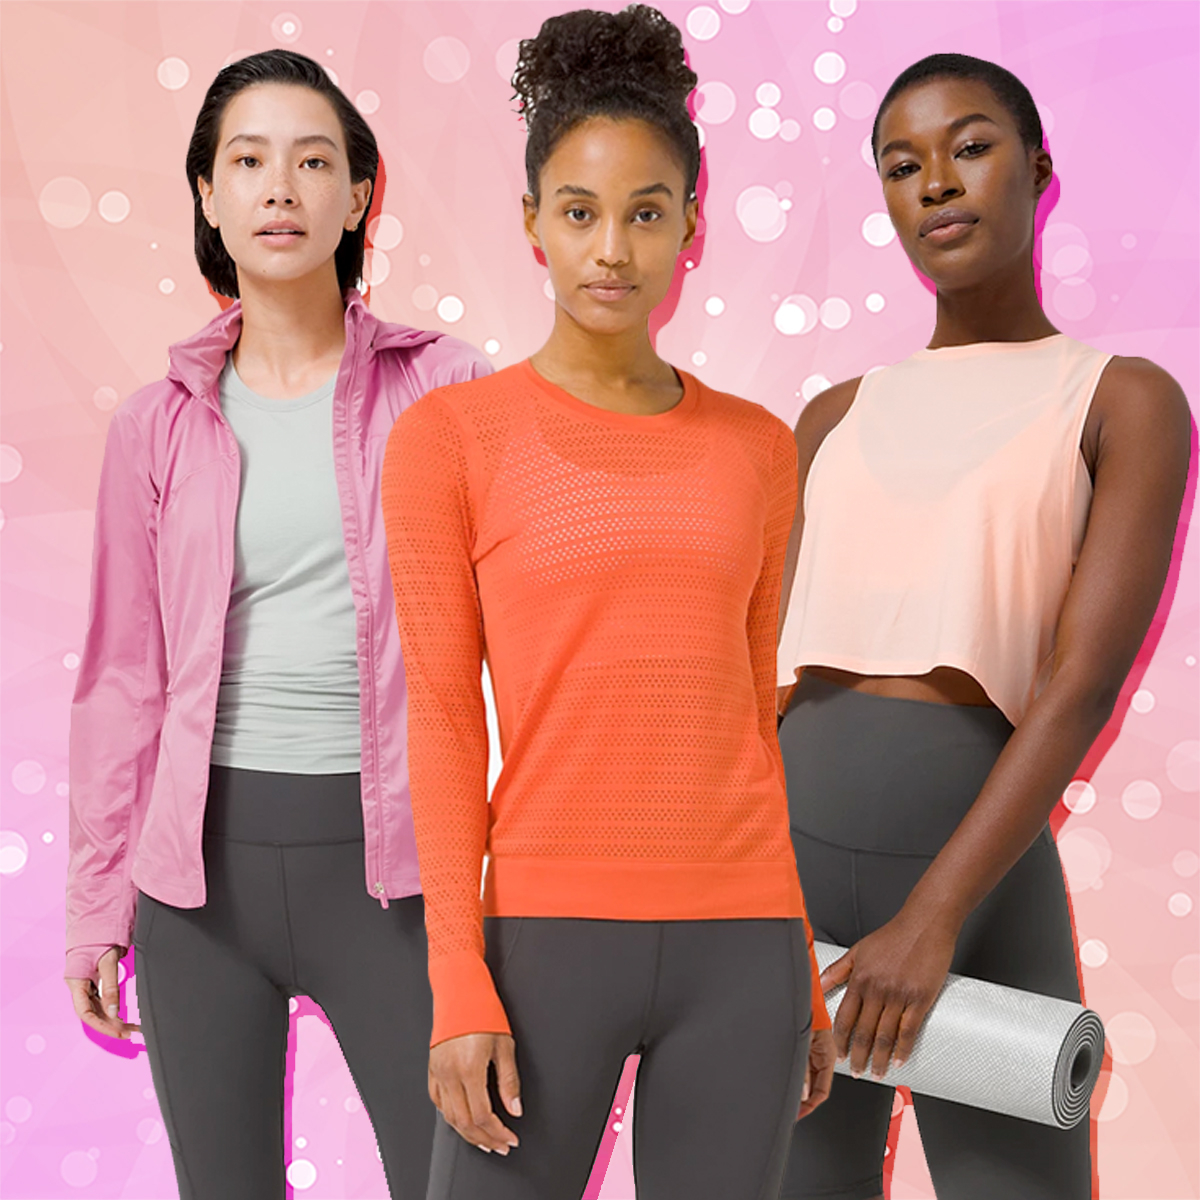 Lululemon's Warehouse Sale is Finally Here and the Discounts are Epic